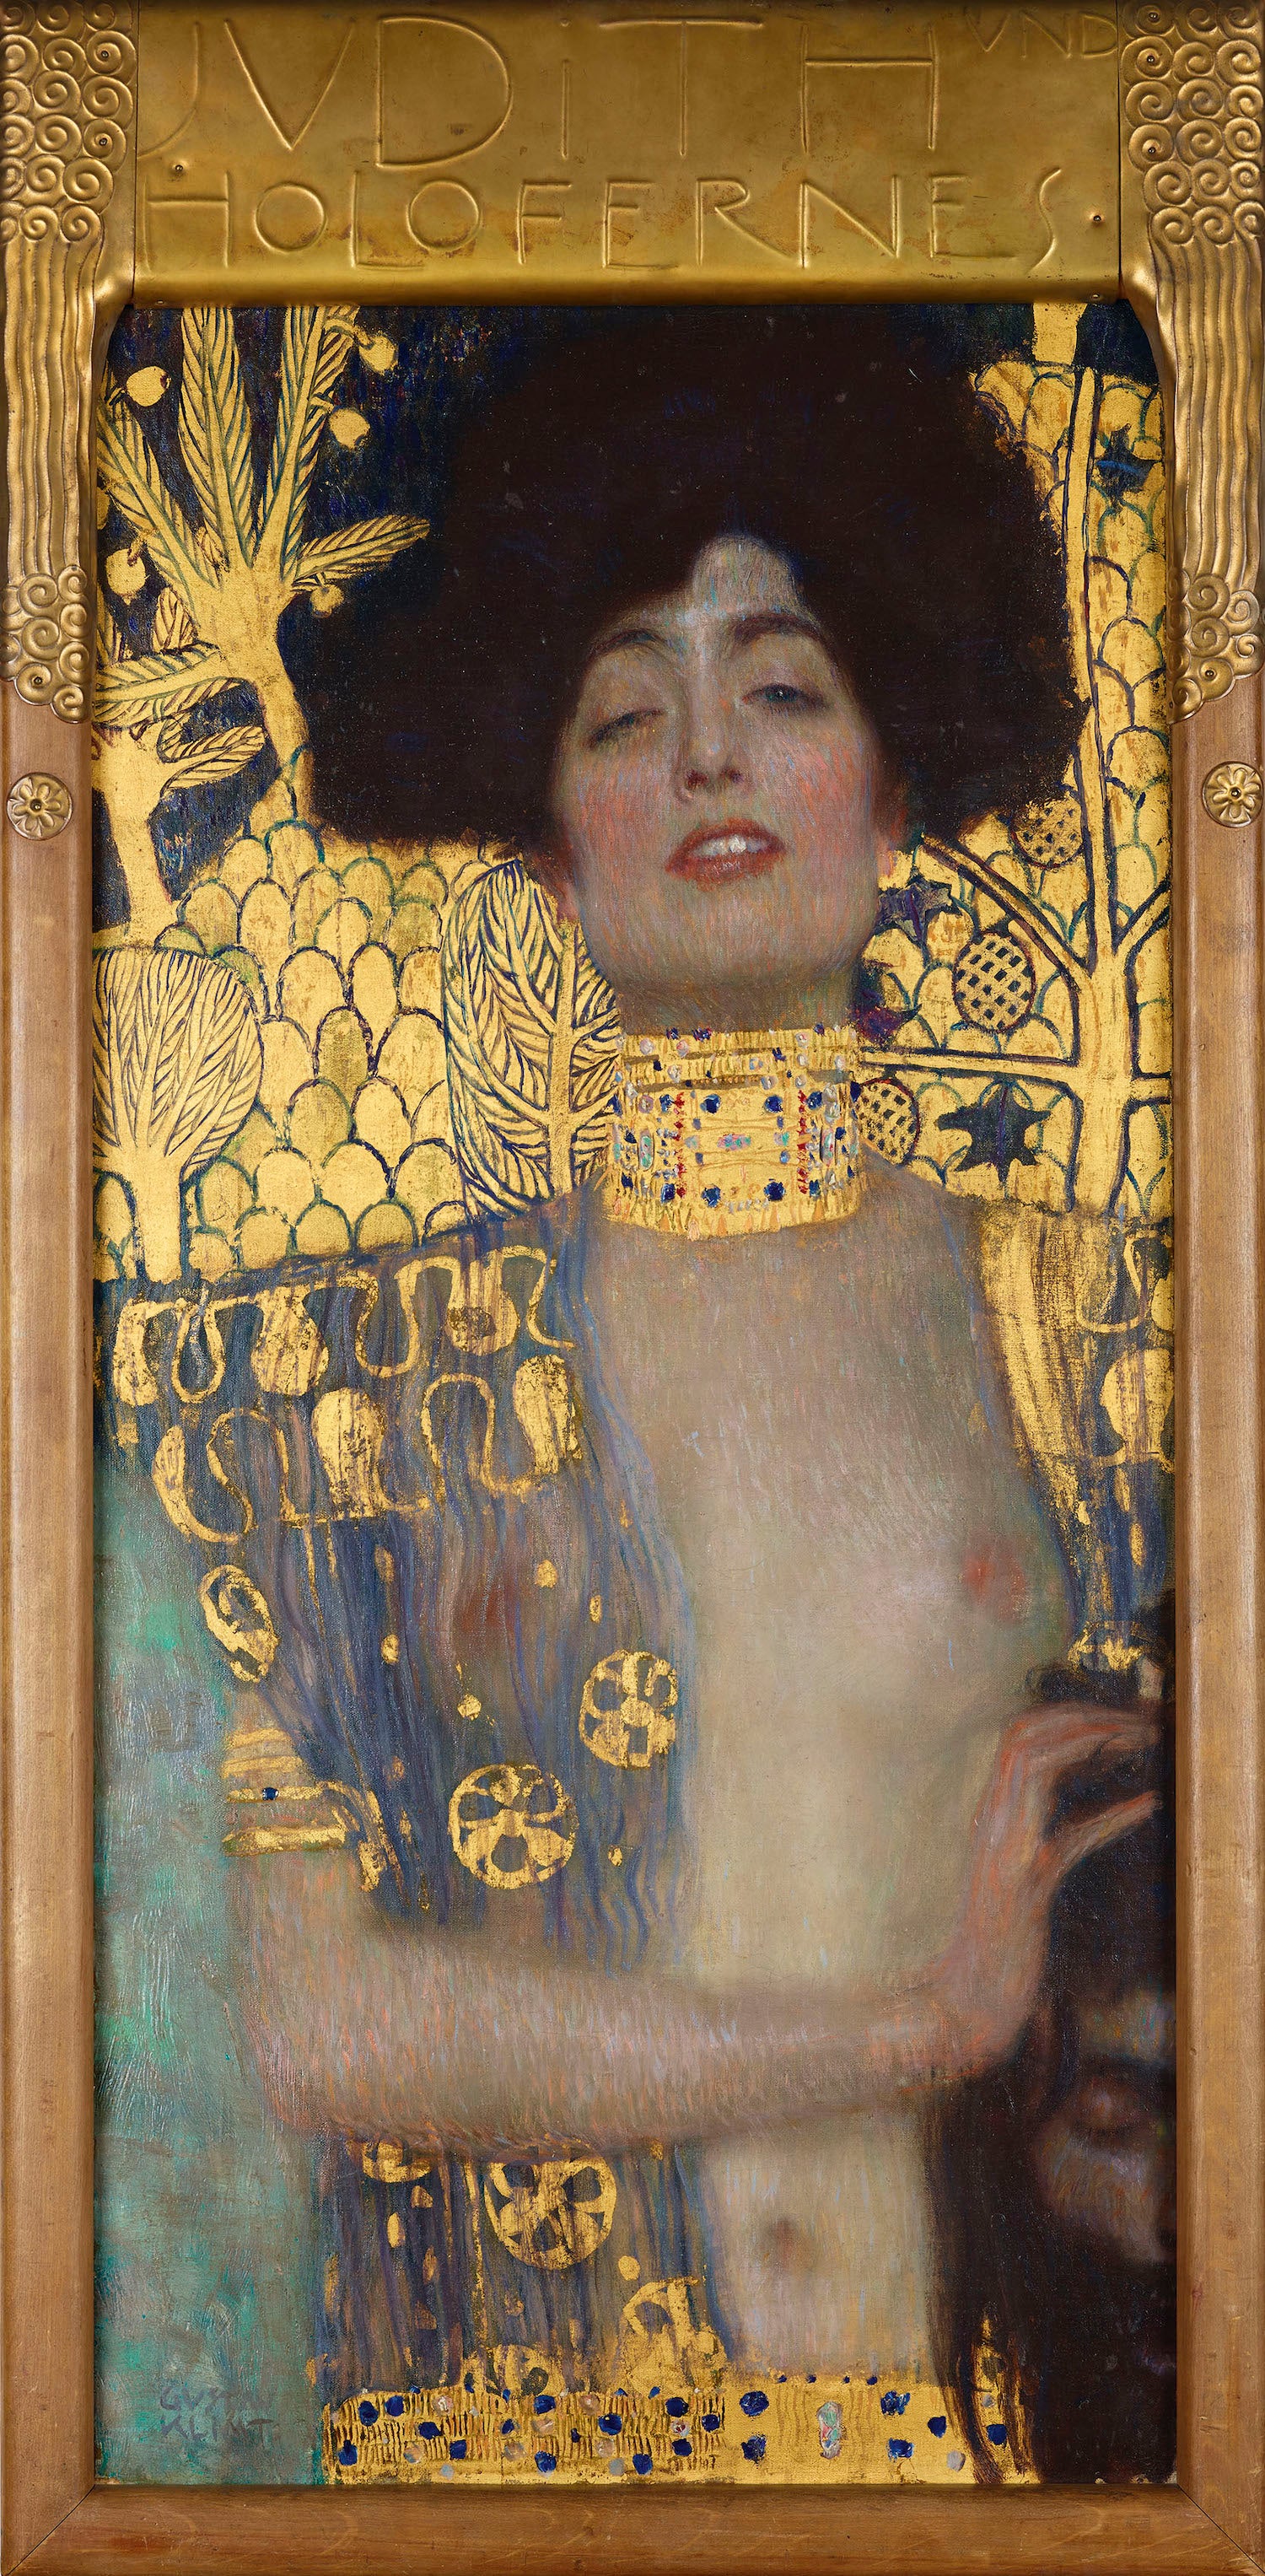 Judith and the Head of Holoferne (1901)